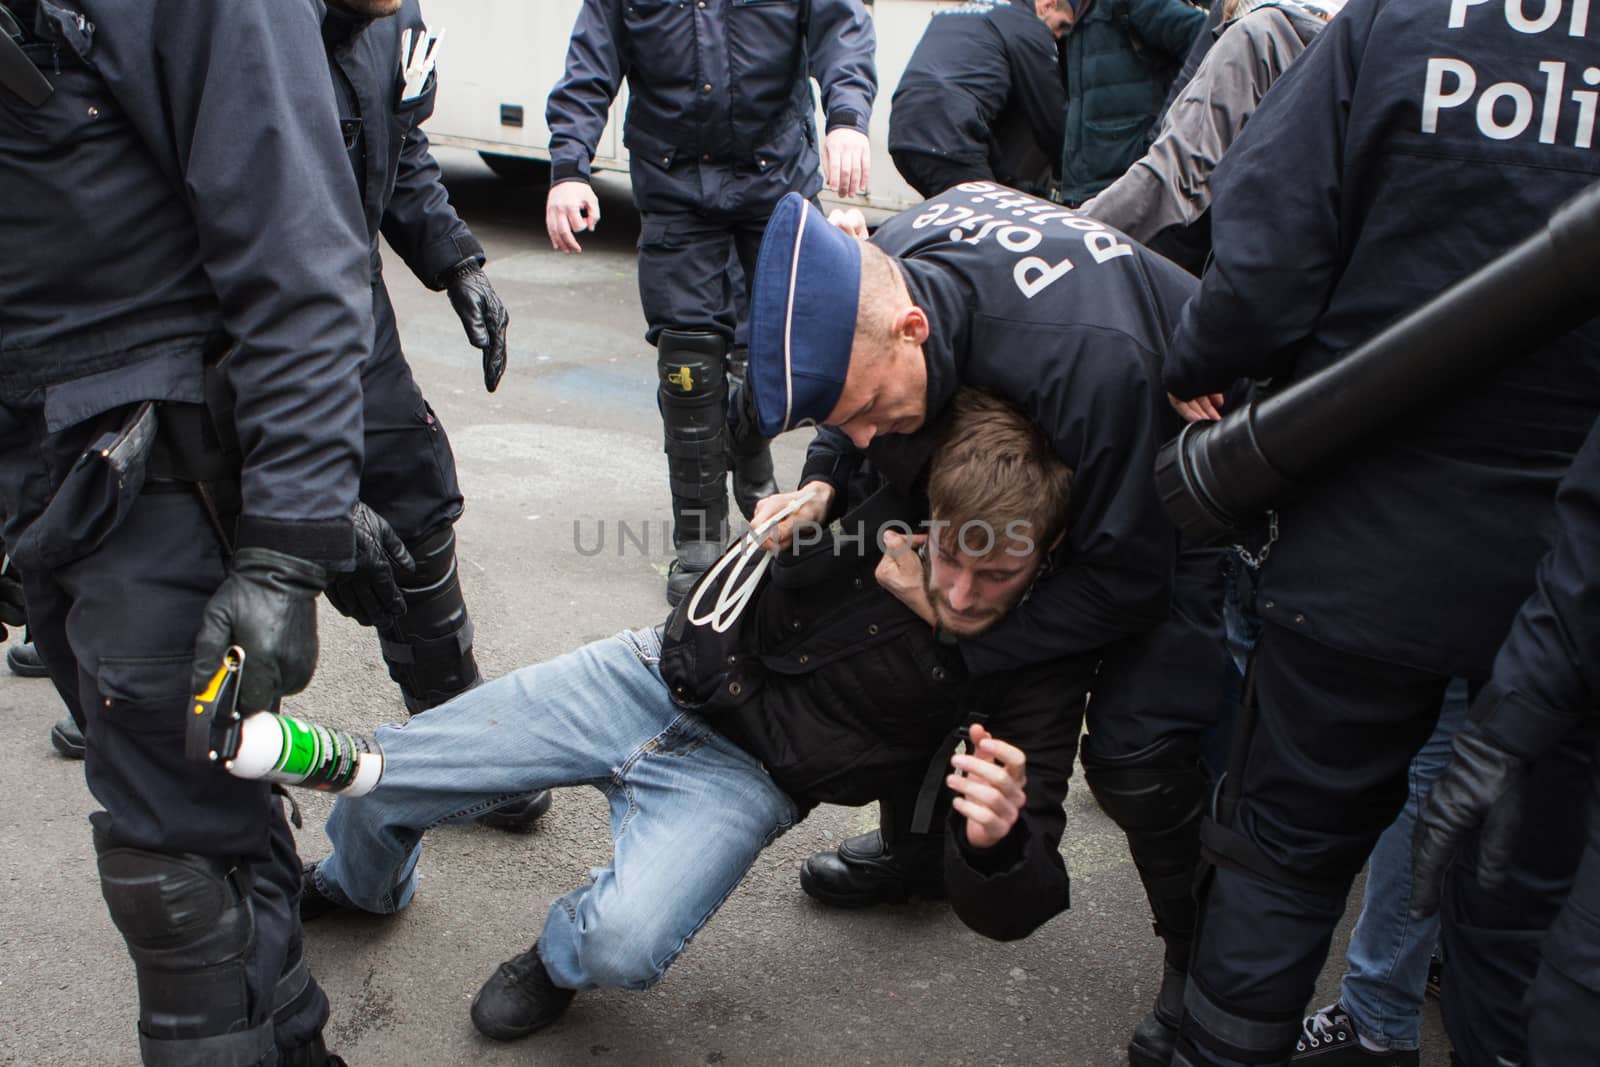 BELGIUM, Brussels: Police arrest at least ten people during a demonstration against racism at Bourse square on April 2, 2016, central Brussels, according to Belgian newspaper Le Soir. Belgian authorities ban any gathering on the same day. A week before, riot police fired water cannon at far-right football hooligans who invaded the same square in the Belgian capital that has become a memorial to the victims of the Brussels attacks. 